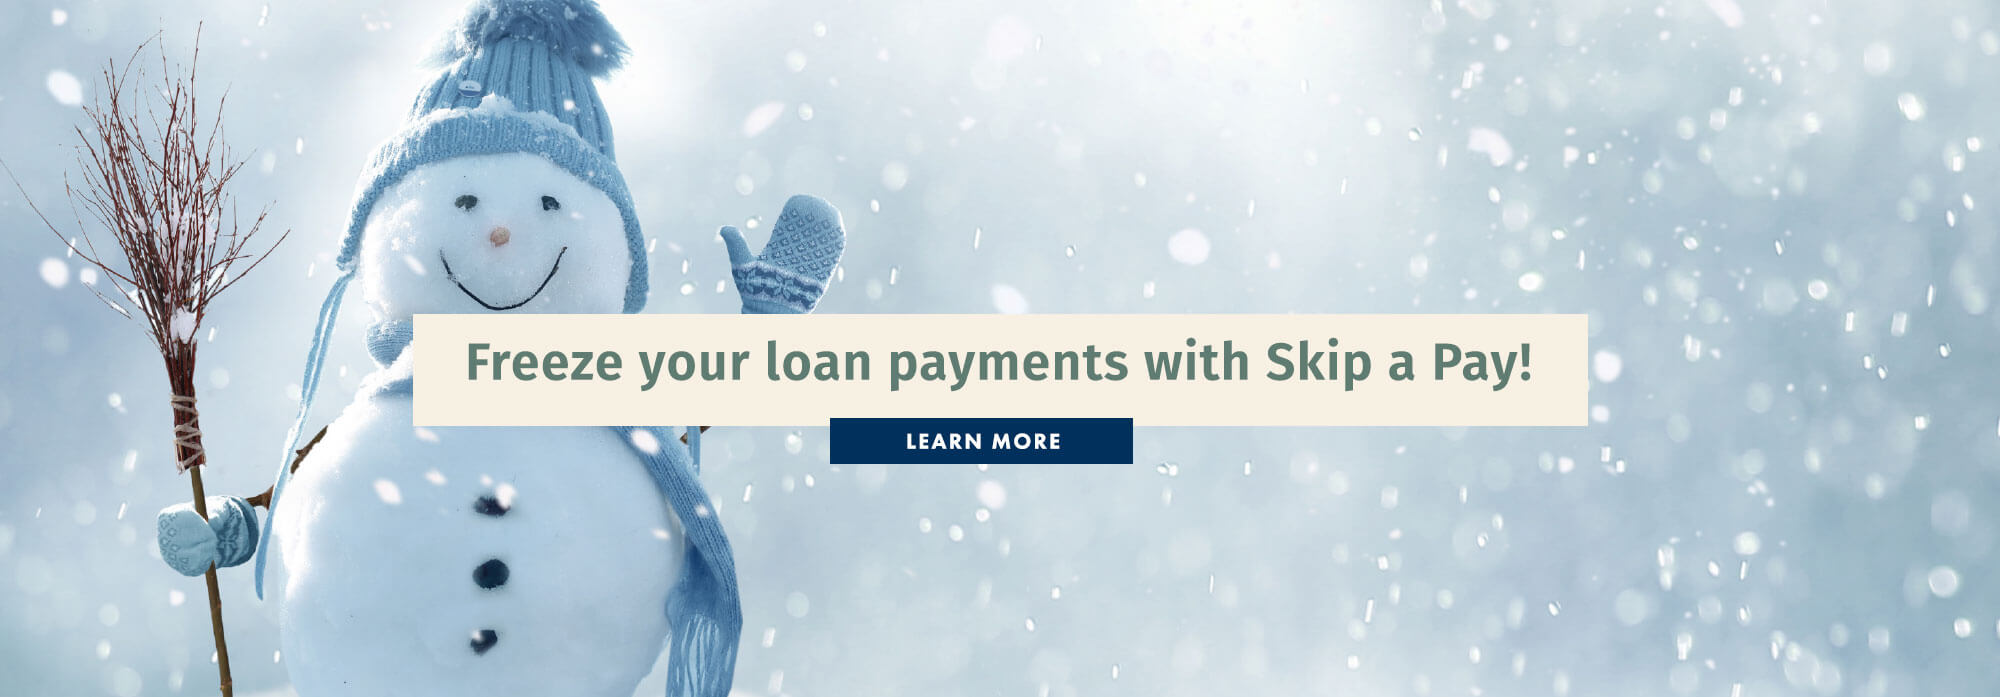 Freeze your loan payments with Skip a Pay!